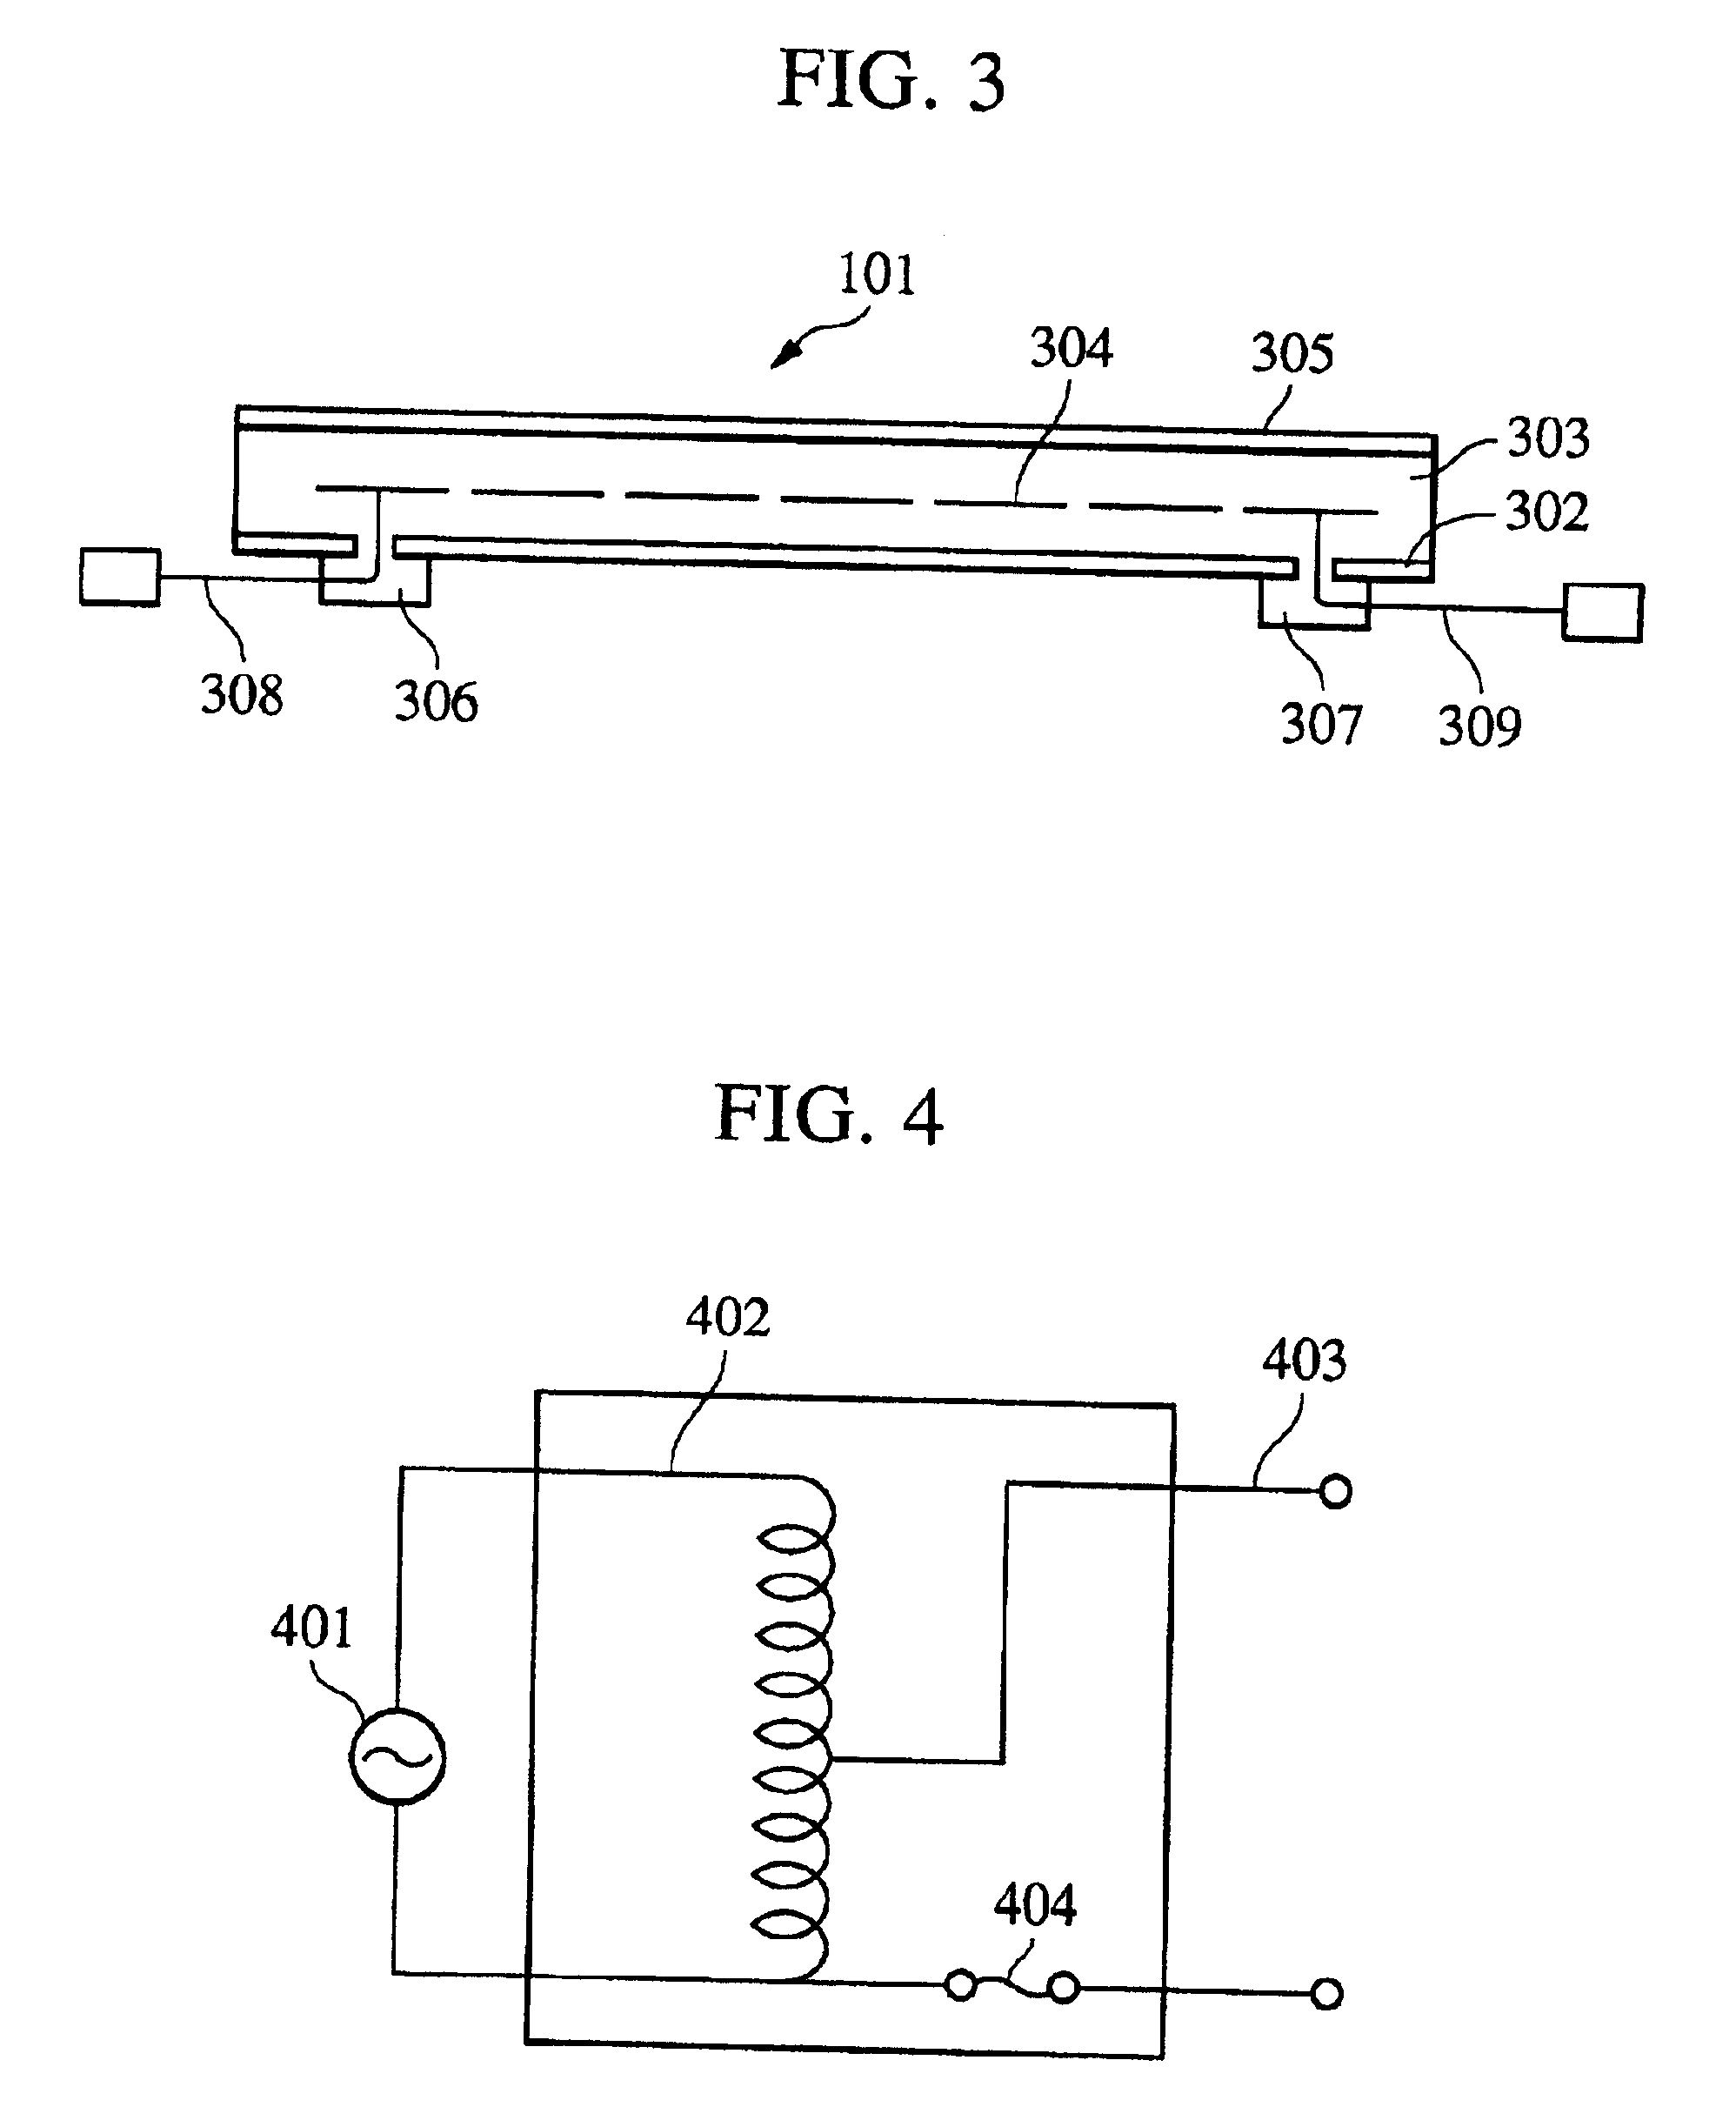 Method and apparatus for testing solar panel, manufacturing method for manufacturing the solar panel, method and apparatus for inspecting solar panel generating system, insulation resistance measuring apparatus, and withstand voltage tester